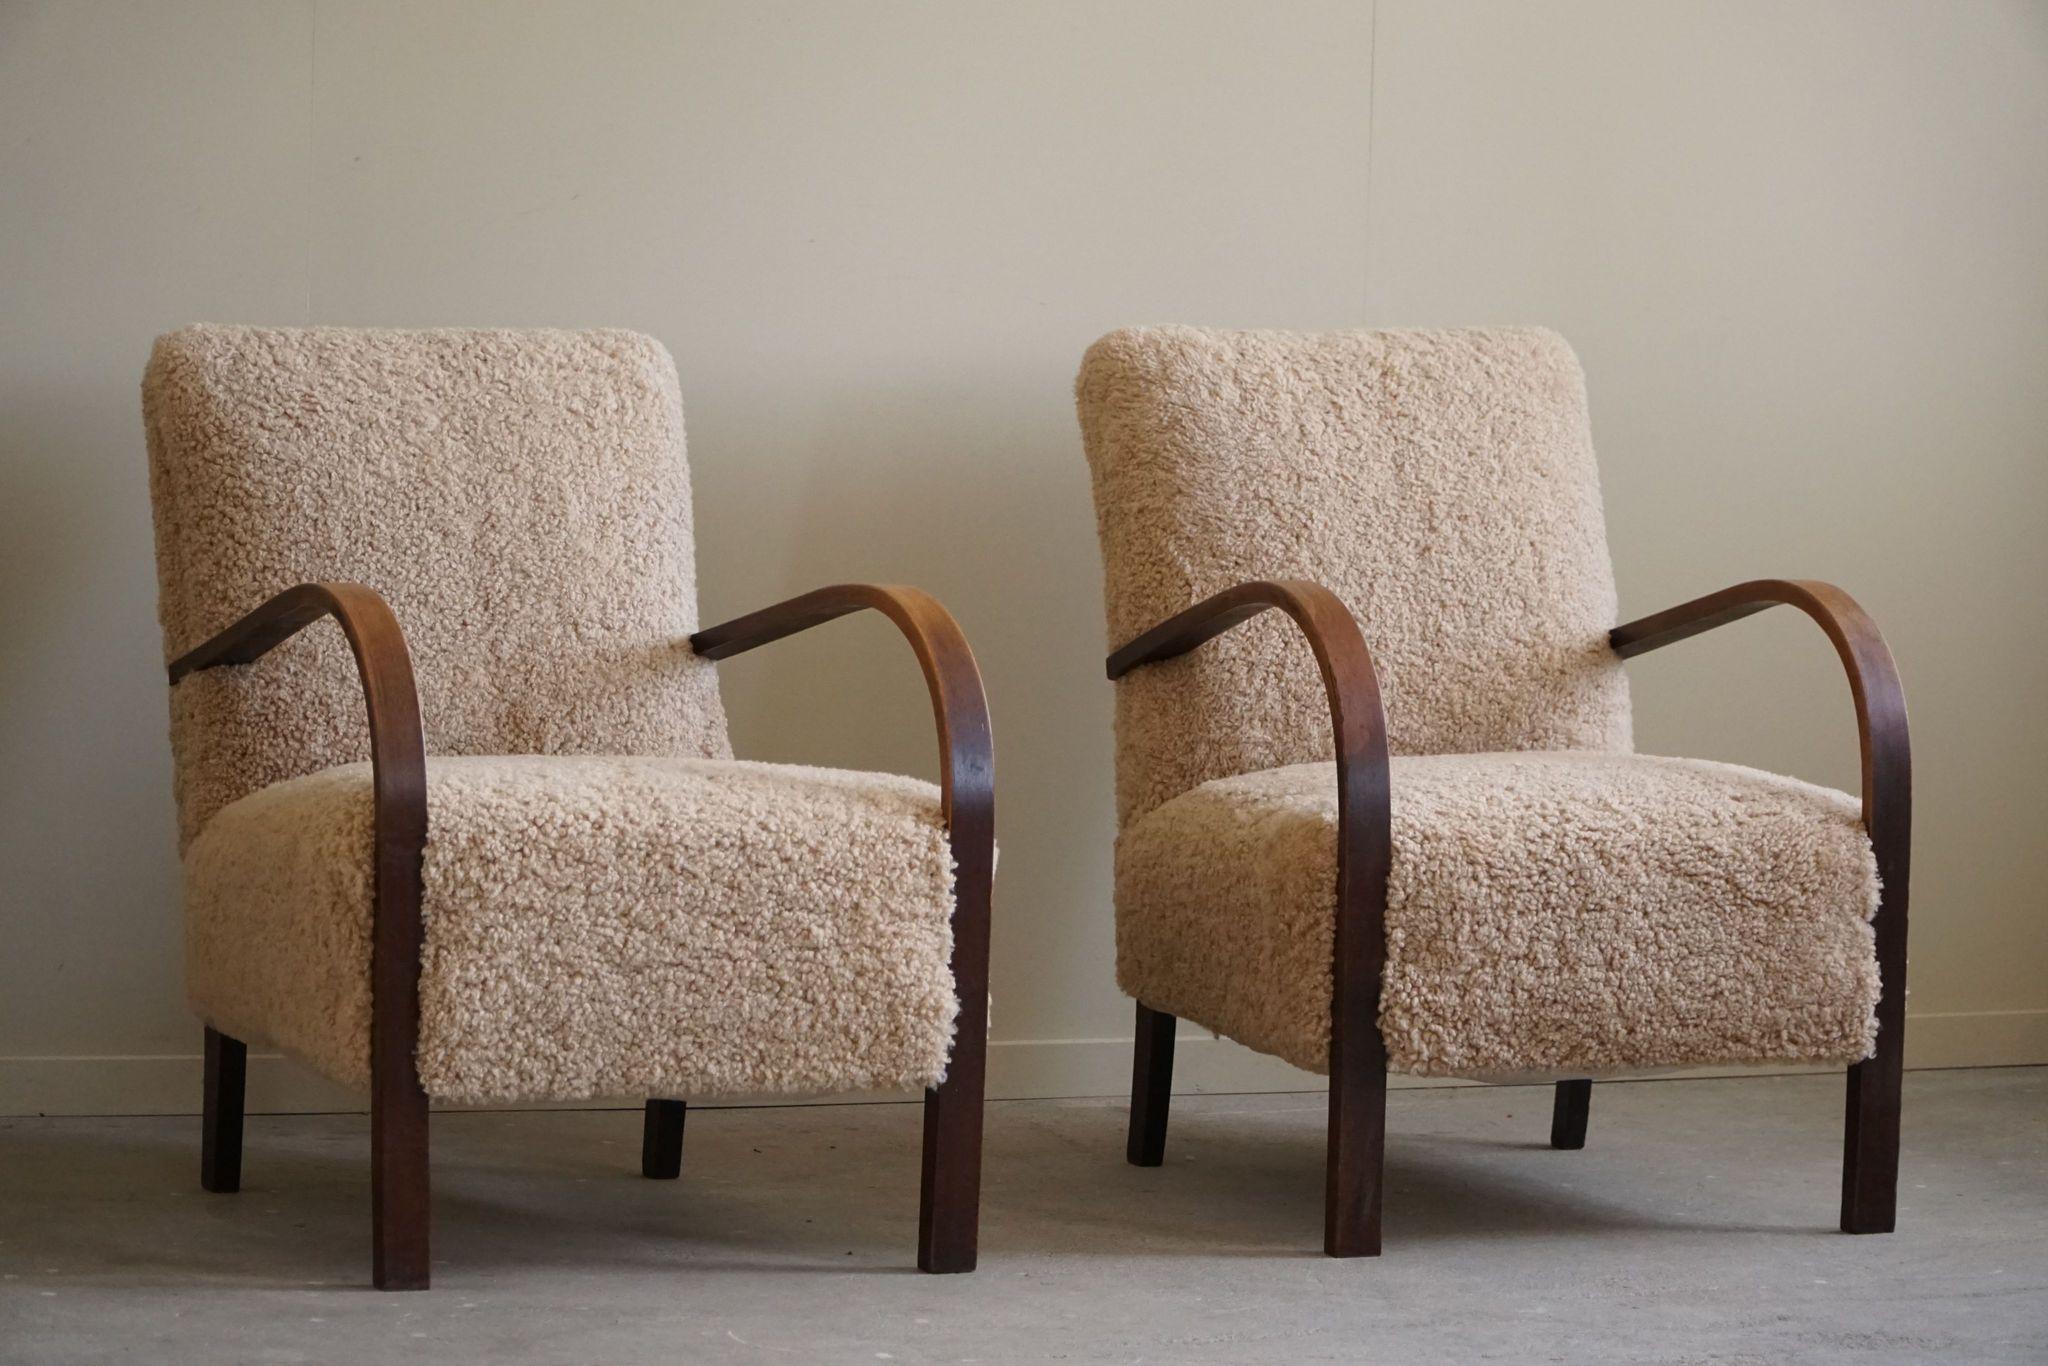 Fritz Hansen, Pair of Danish Curved Art Deco Lounge Chairs, Reupholstered, 1940s For Sale 8